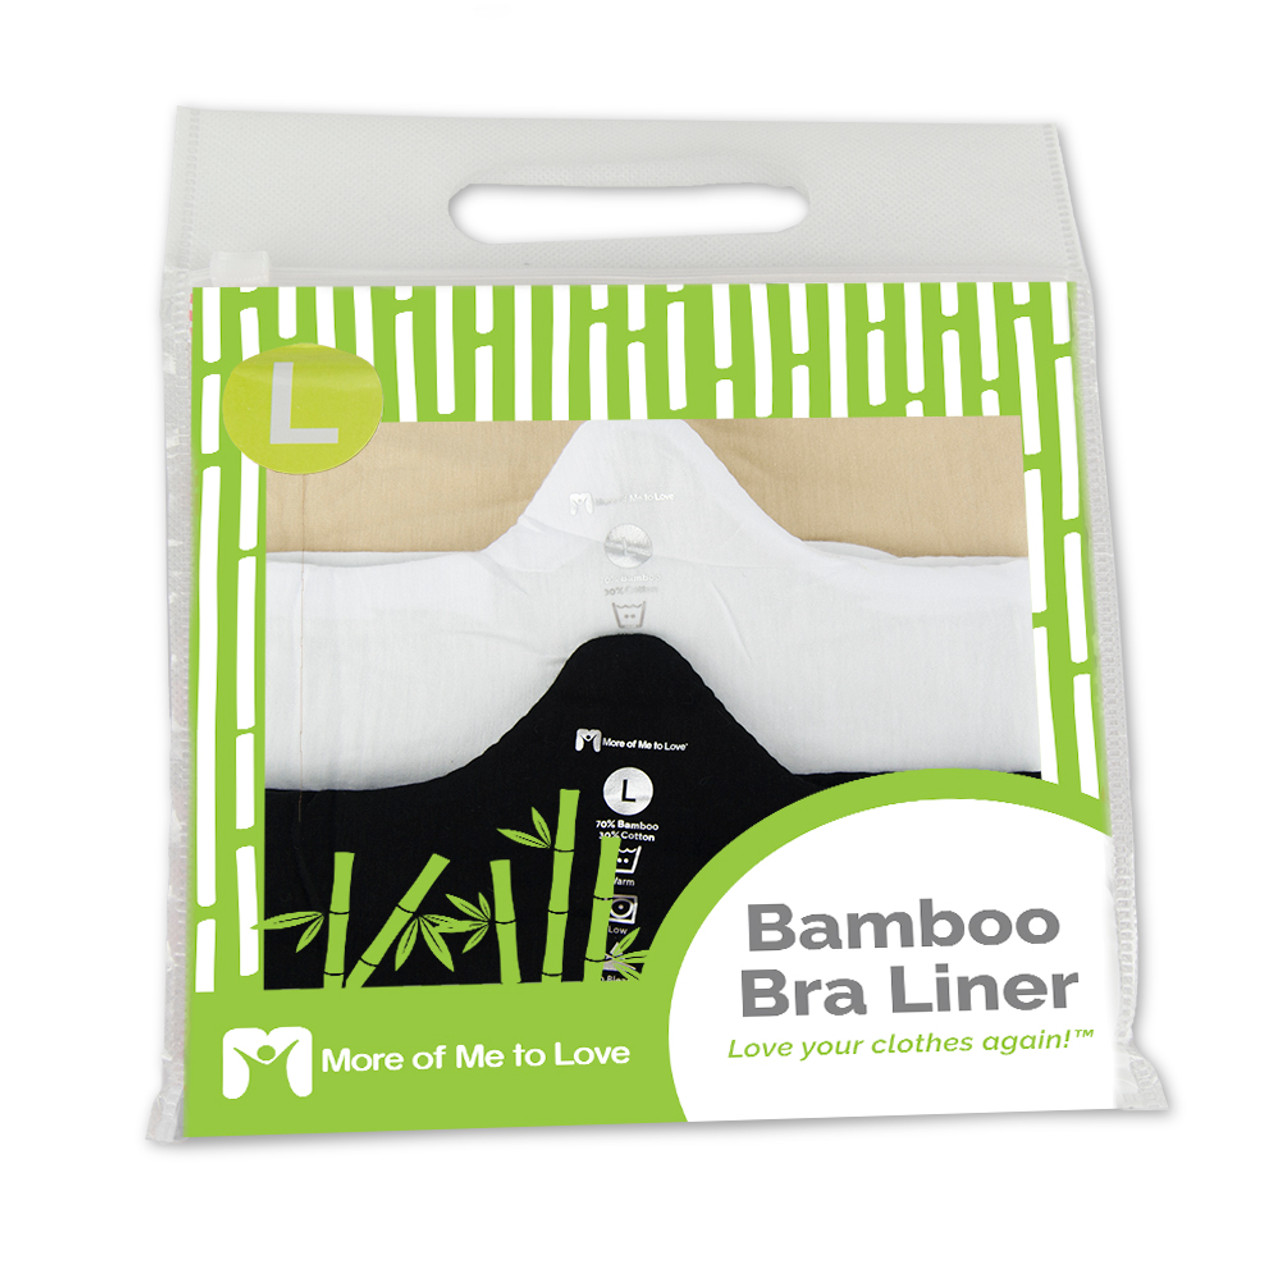 Deluxe Bamboo More of Me to Love Bra Liner